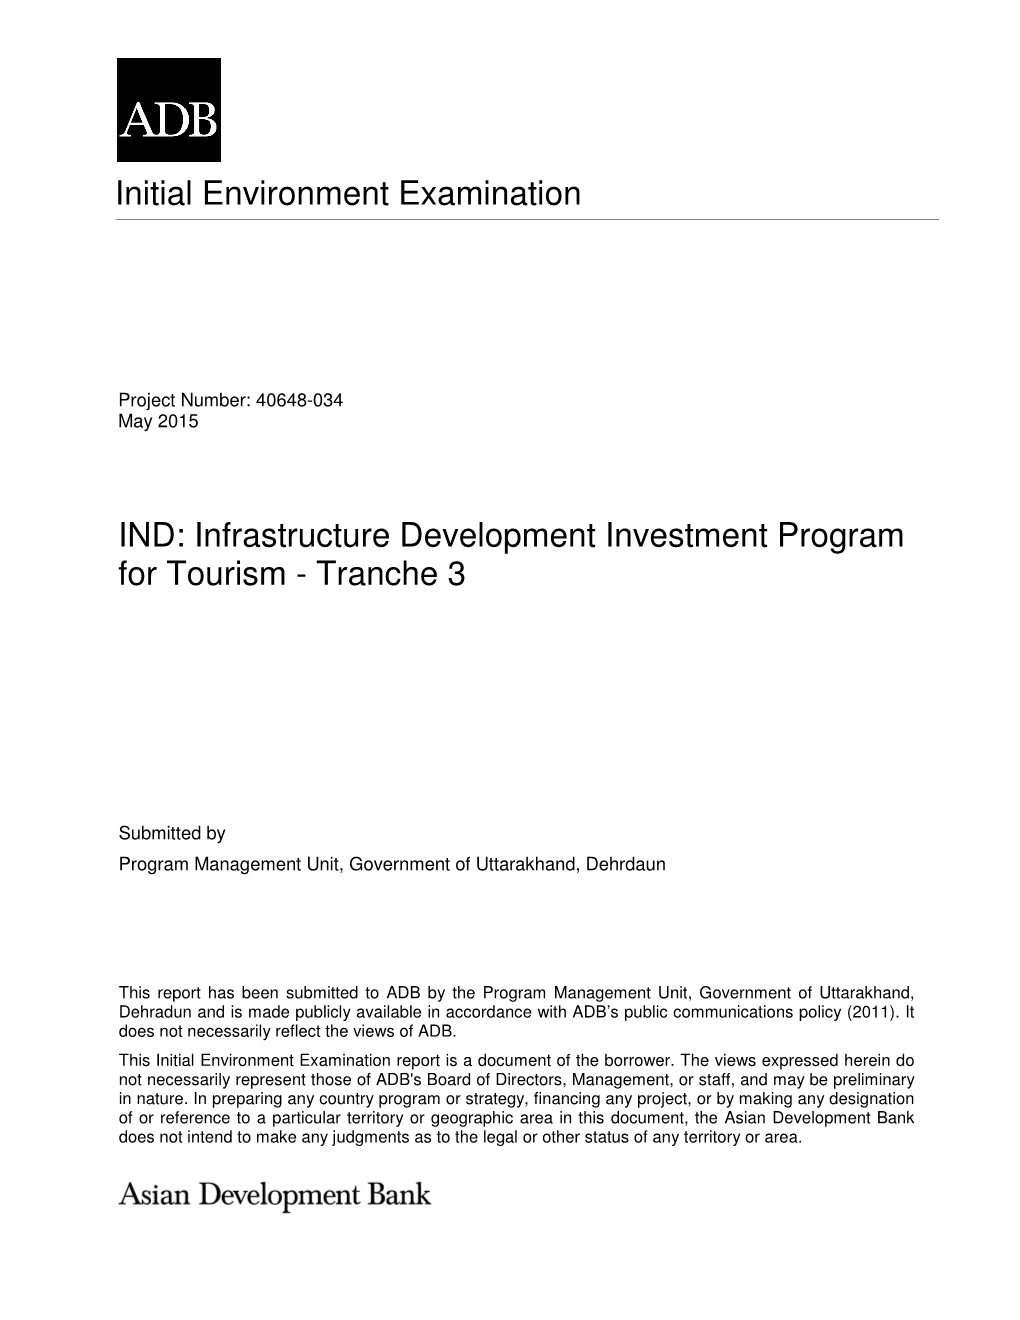 Infrastructure Development Investment Program for Tourism - Tranche 3